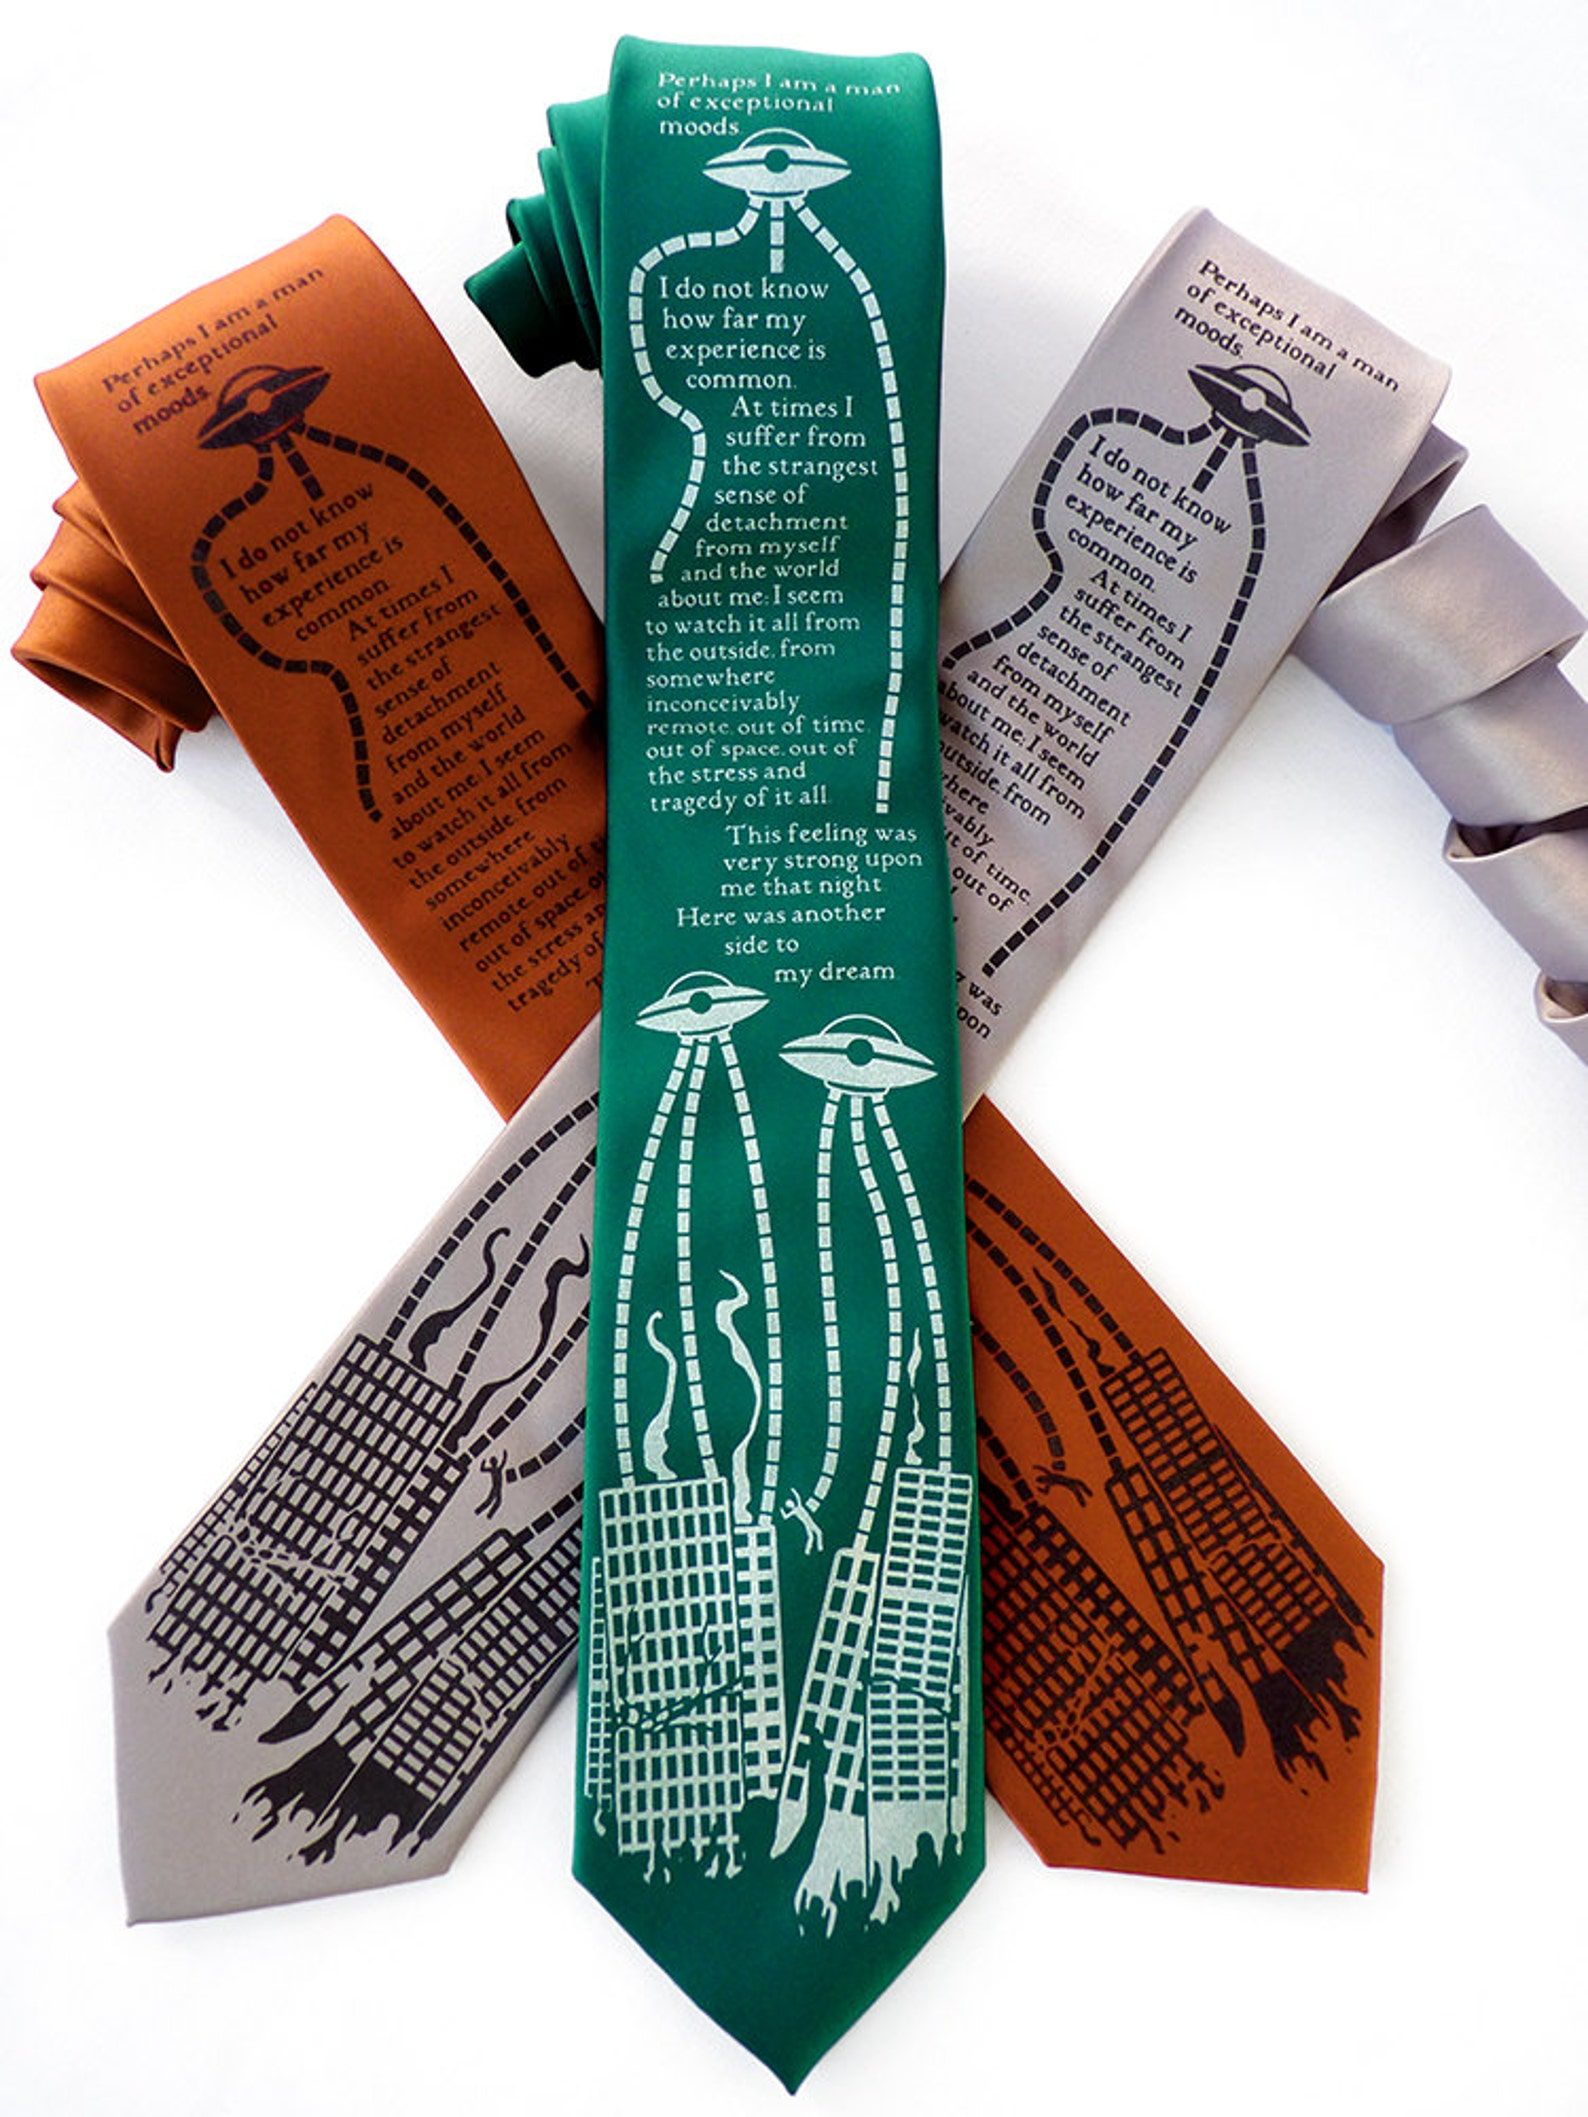 Three neckties in orange, green, and gray all depicting aliens from War of the Worlds with a quote from the book.